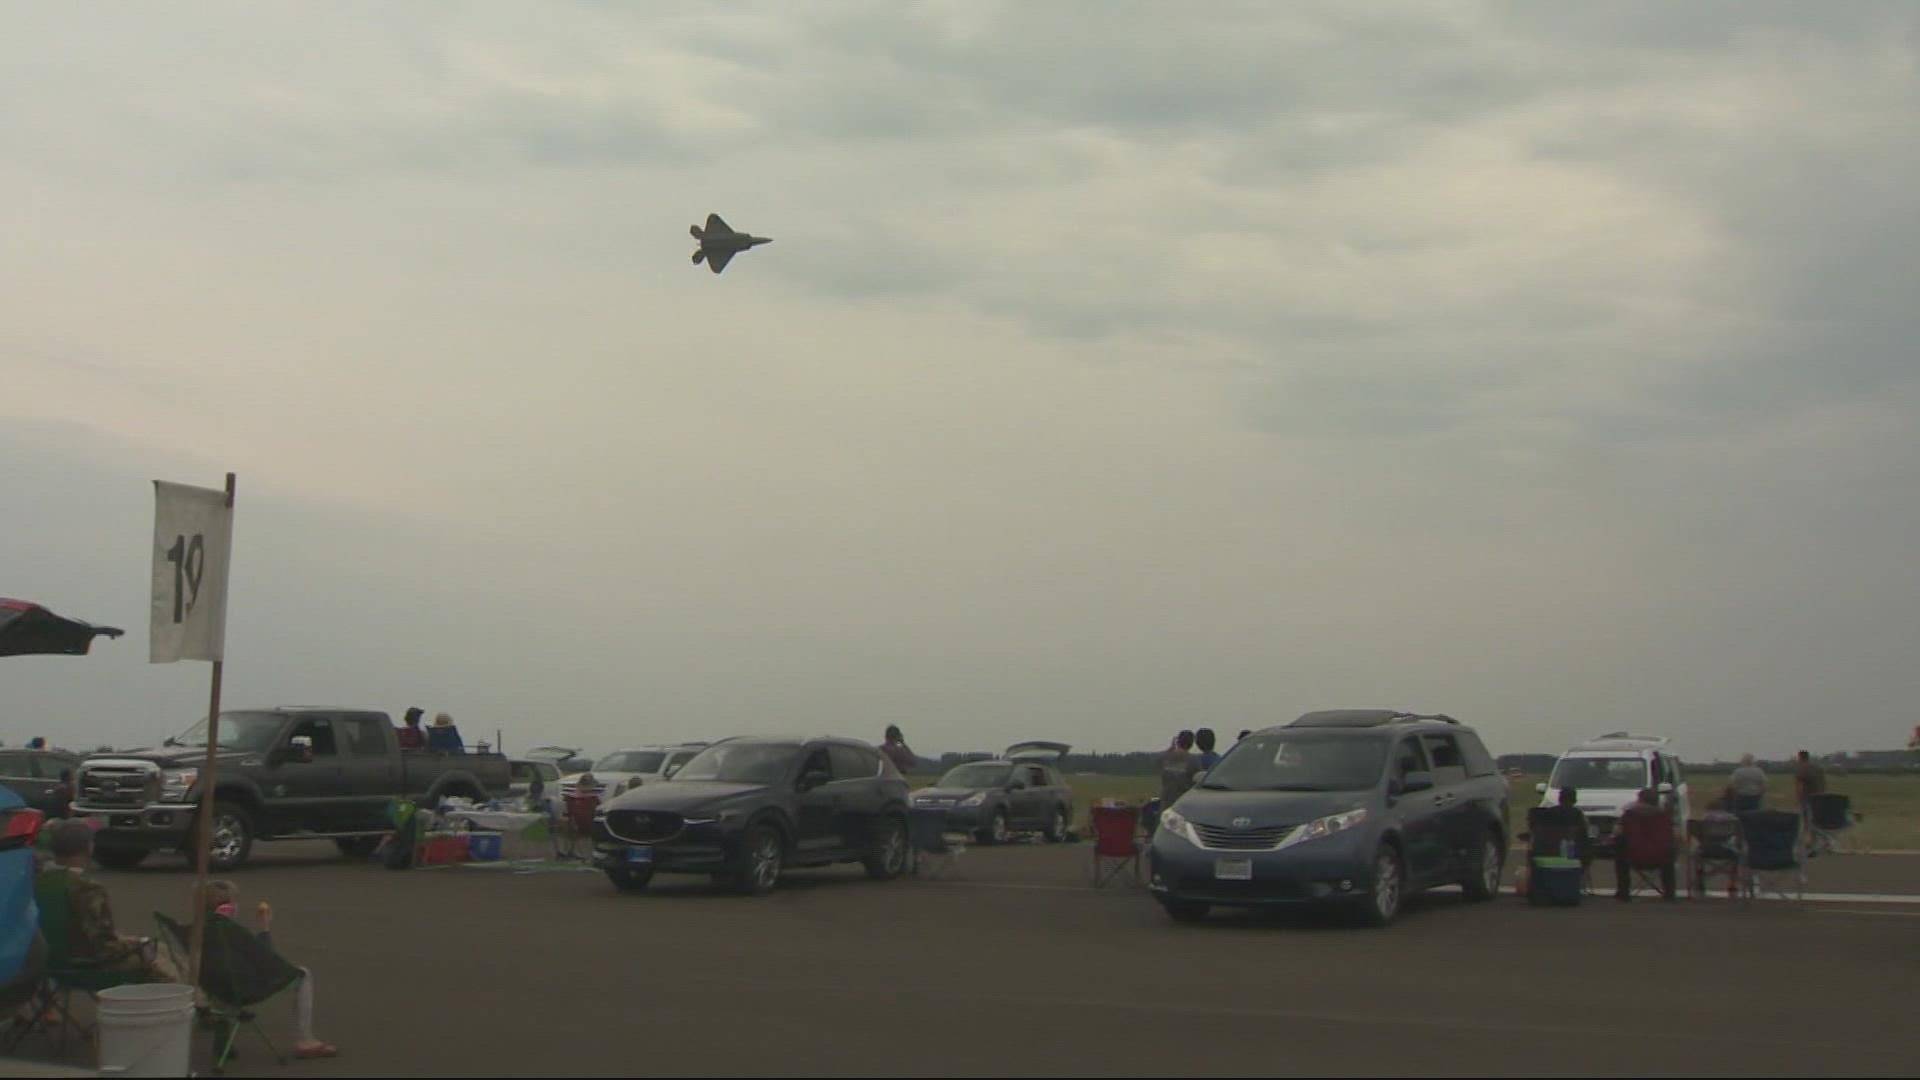 The U.S. Air Force Thunderbirds flew at the event for the first time since 2008.